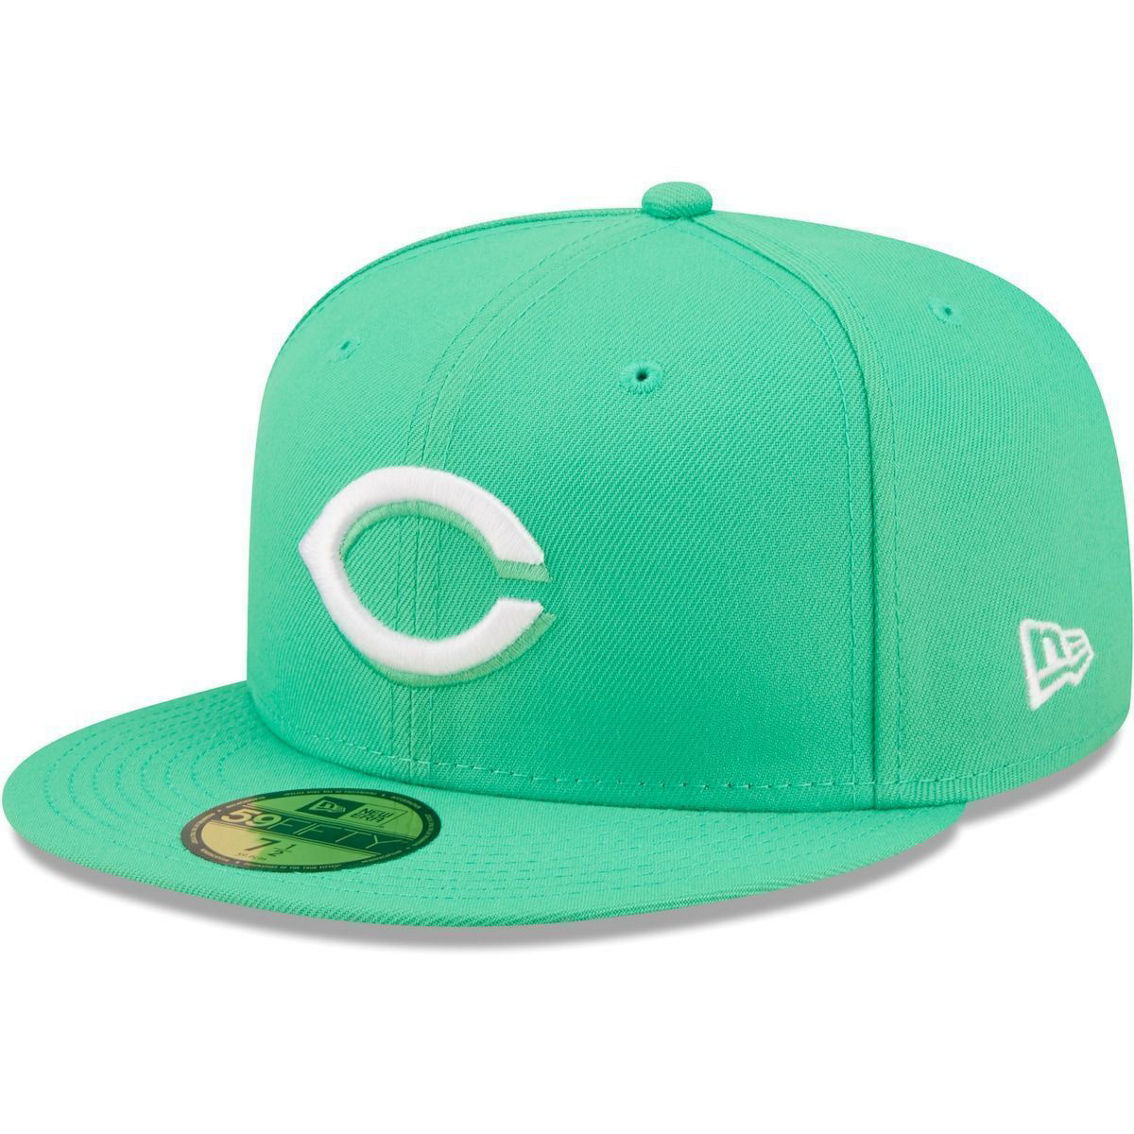 New Era Men's Green Cincinnati Reds Logo 59FIFTY Fitted Hat - Image 2 of 4